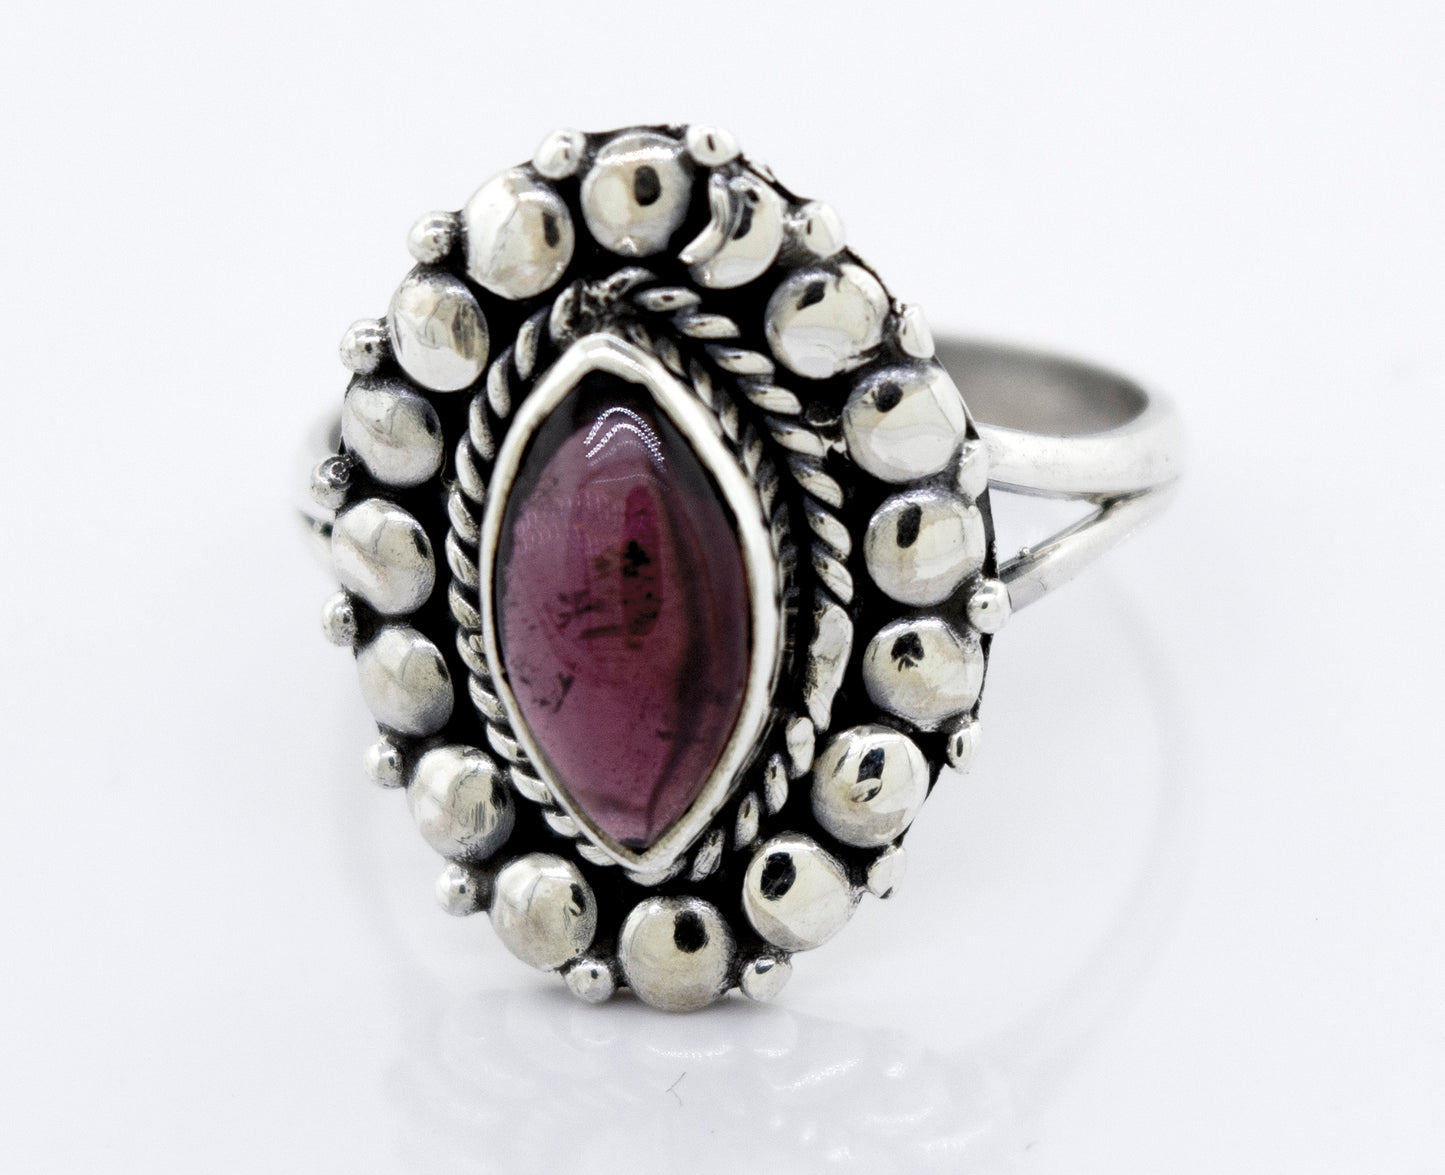 A Marquise Shaped Vibrant Garnet Ring with a garnet stone in a silver setting by Super Silver.